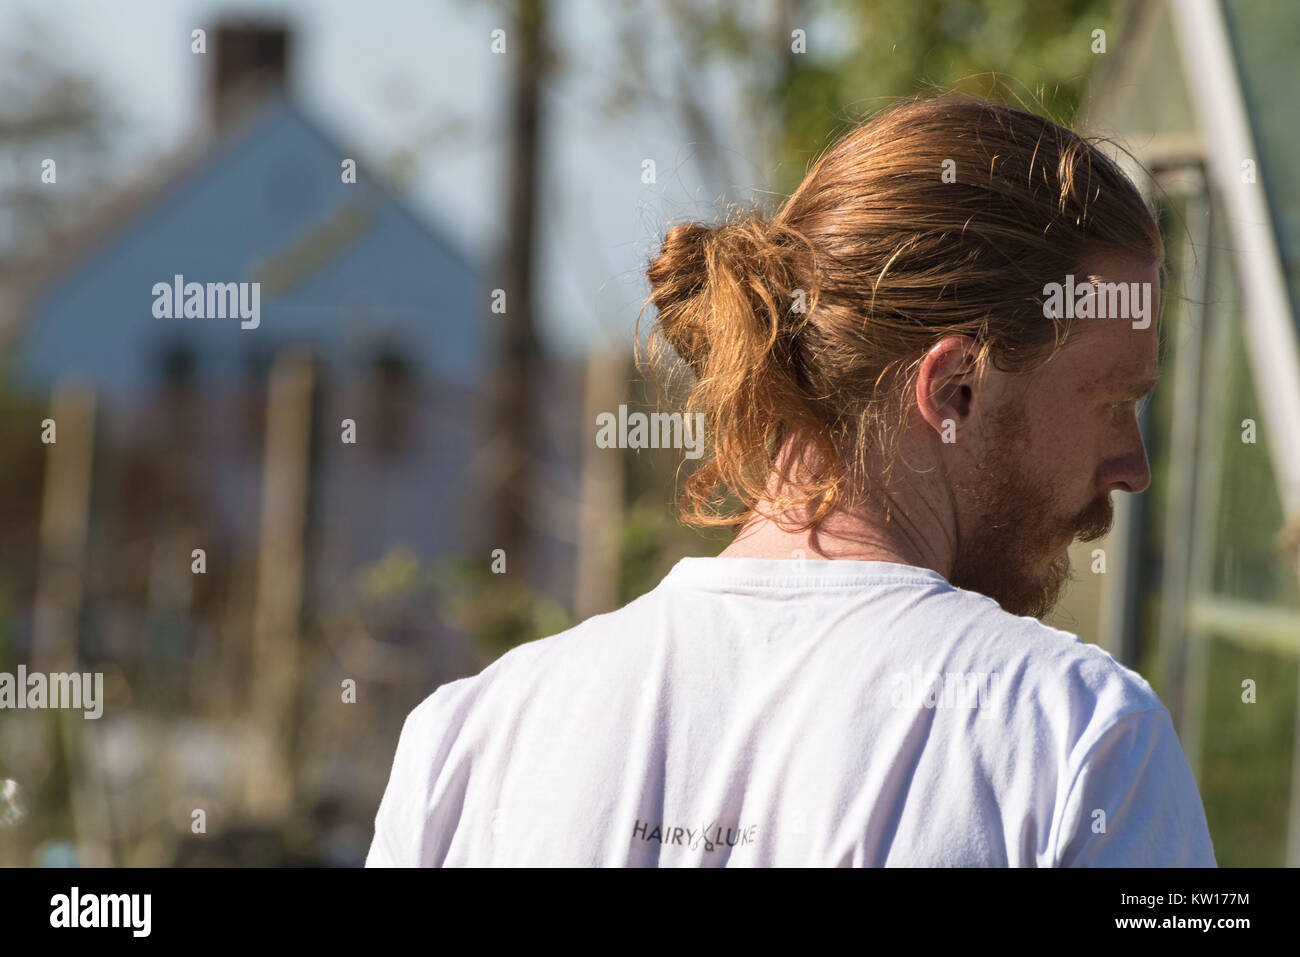 The back of a gardener with long ginger hair in a bum with a beard and moustache sweaty in the sun looking to his right. Stock Photo